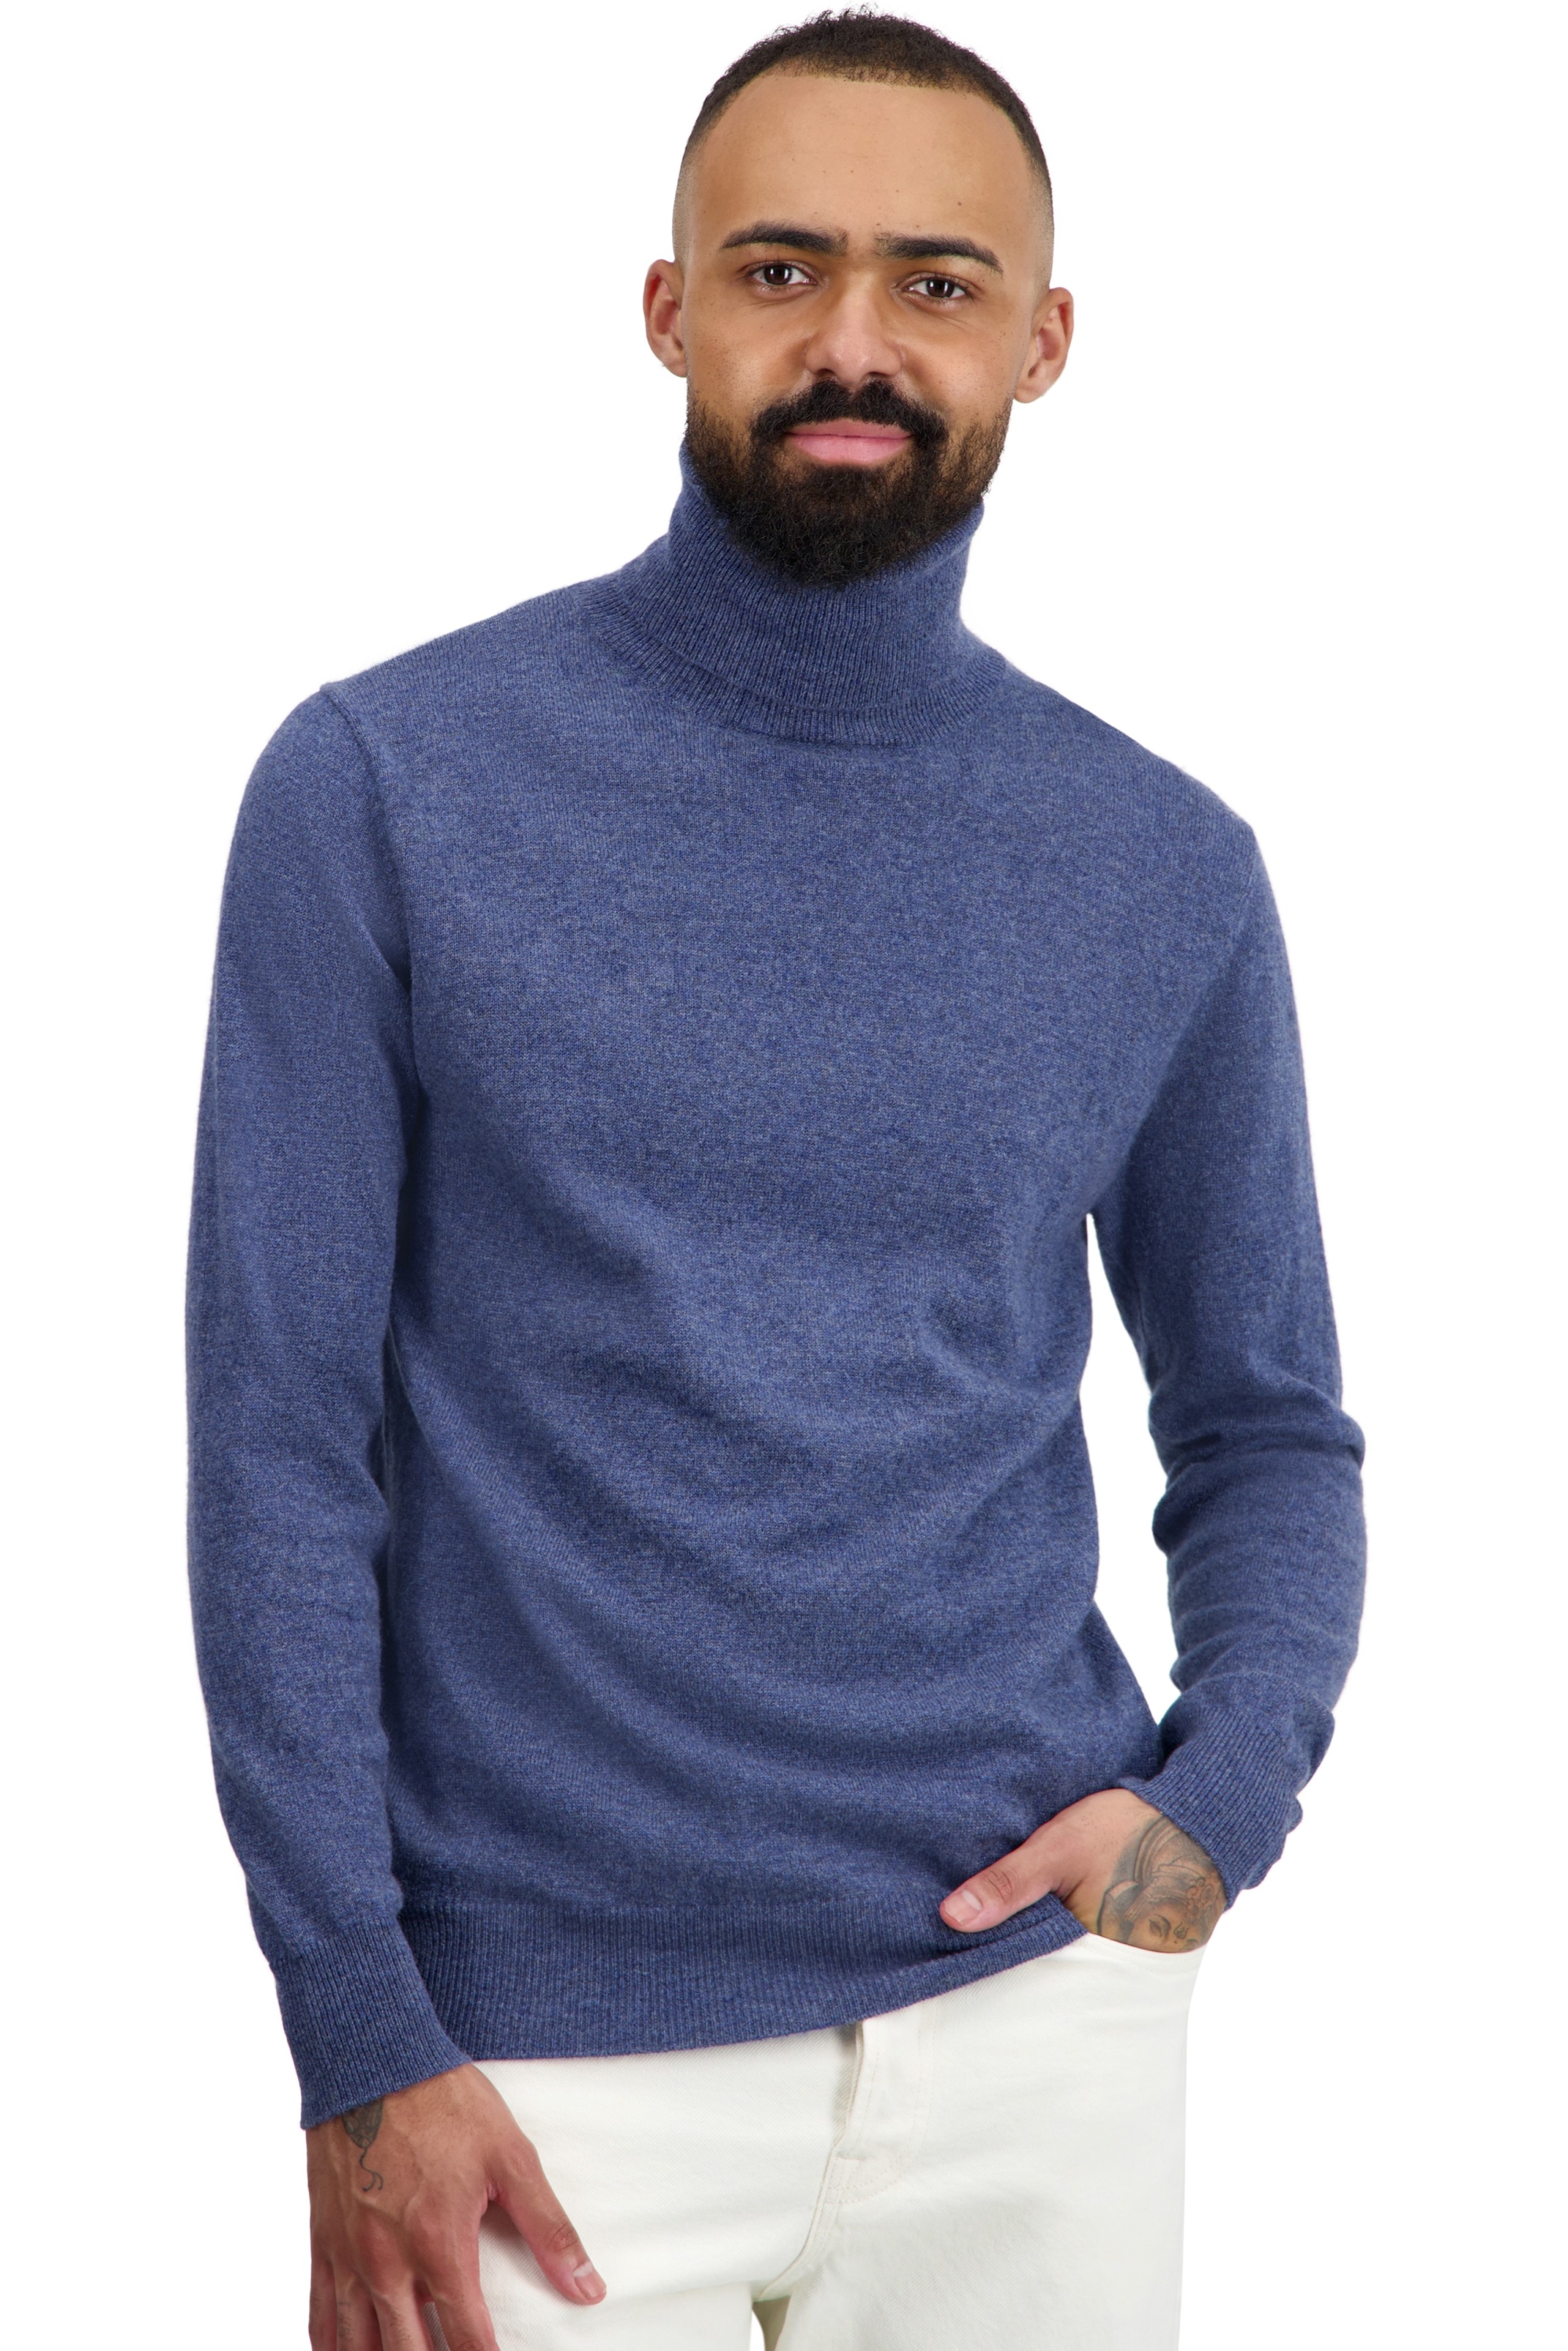 Cashmere men basic sweaters at low prices tarry first nordic blue l